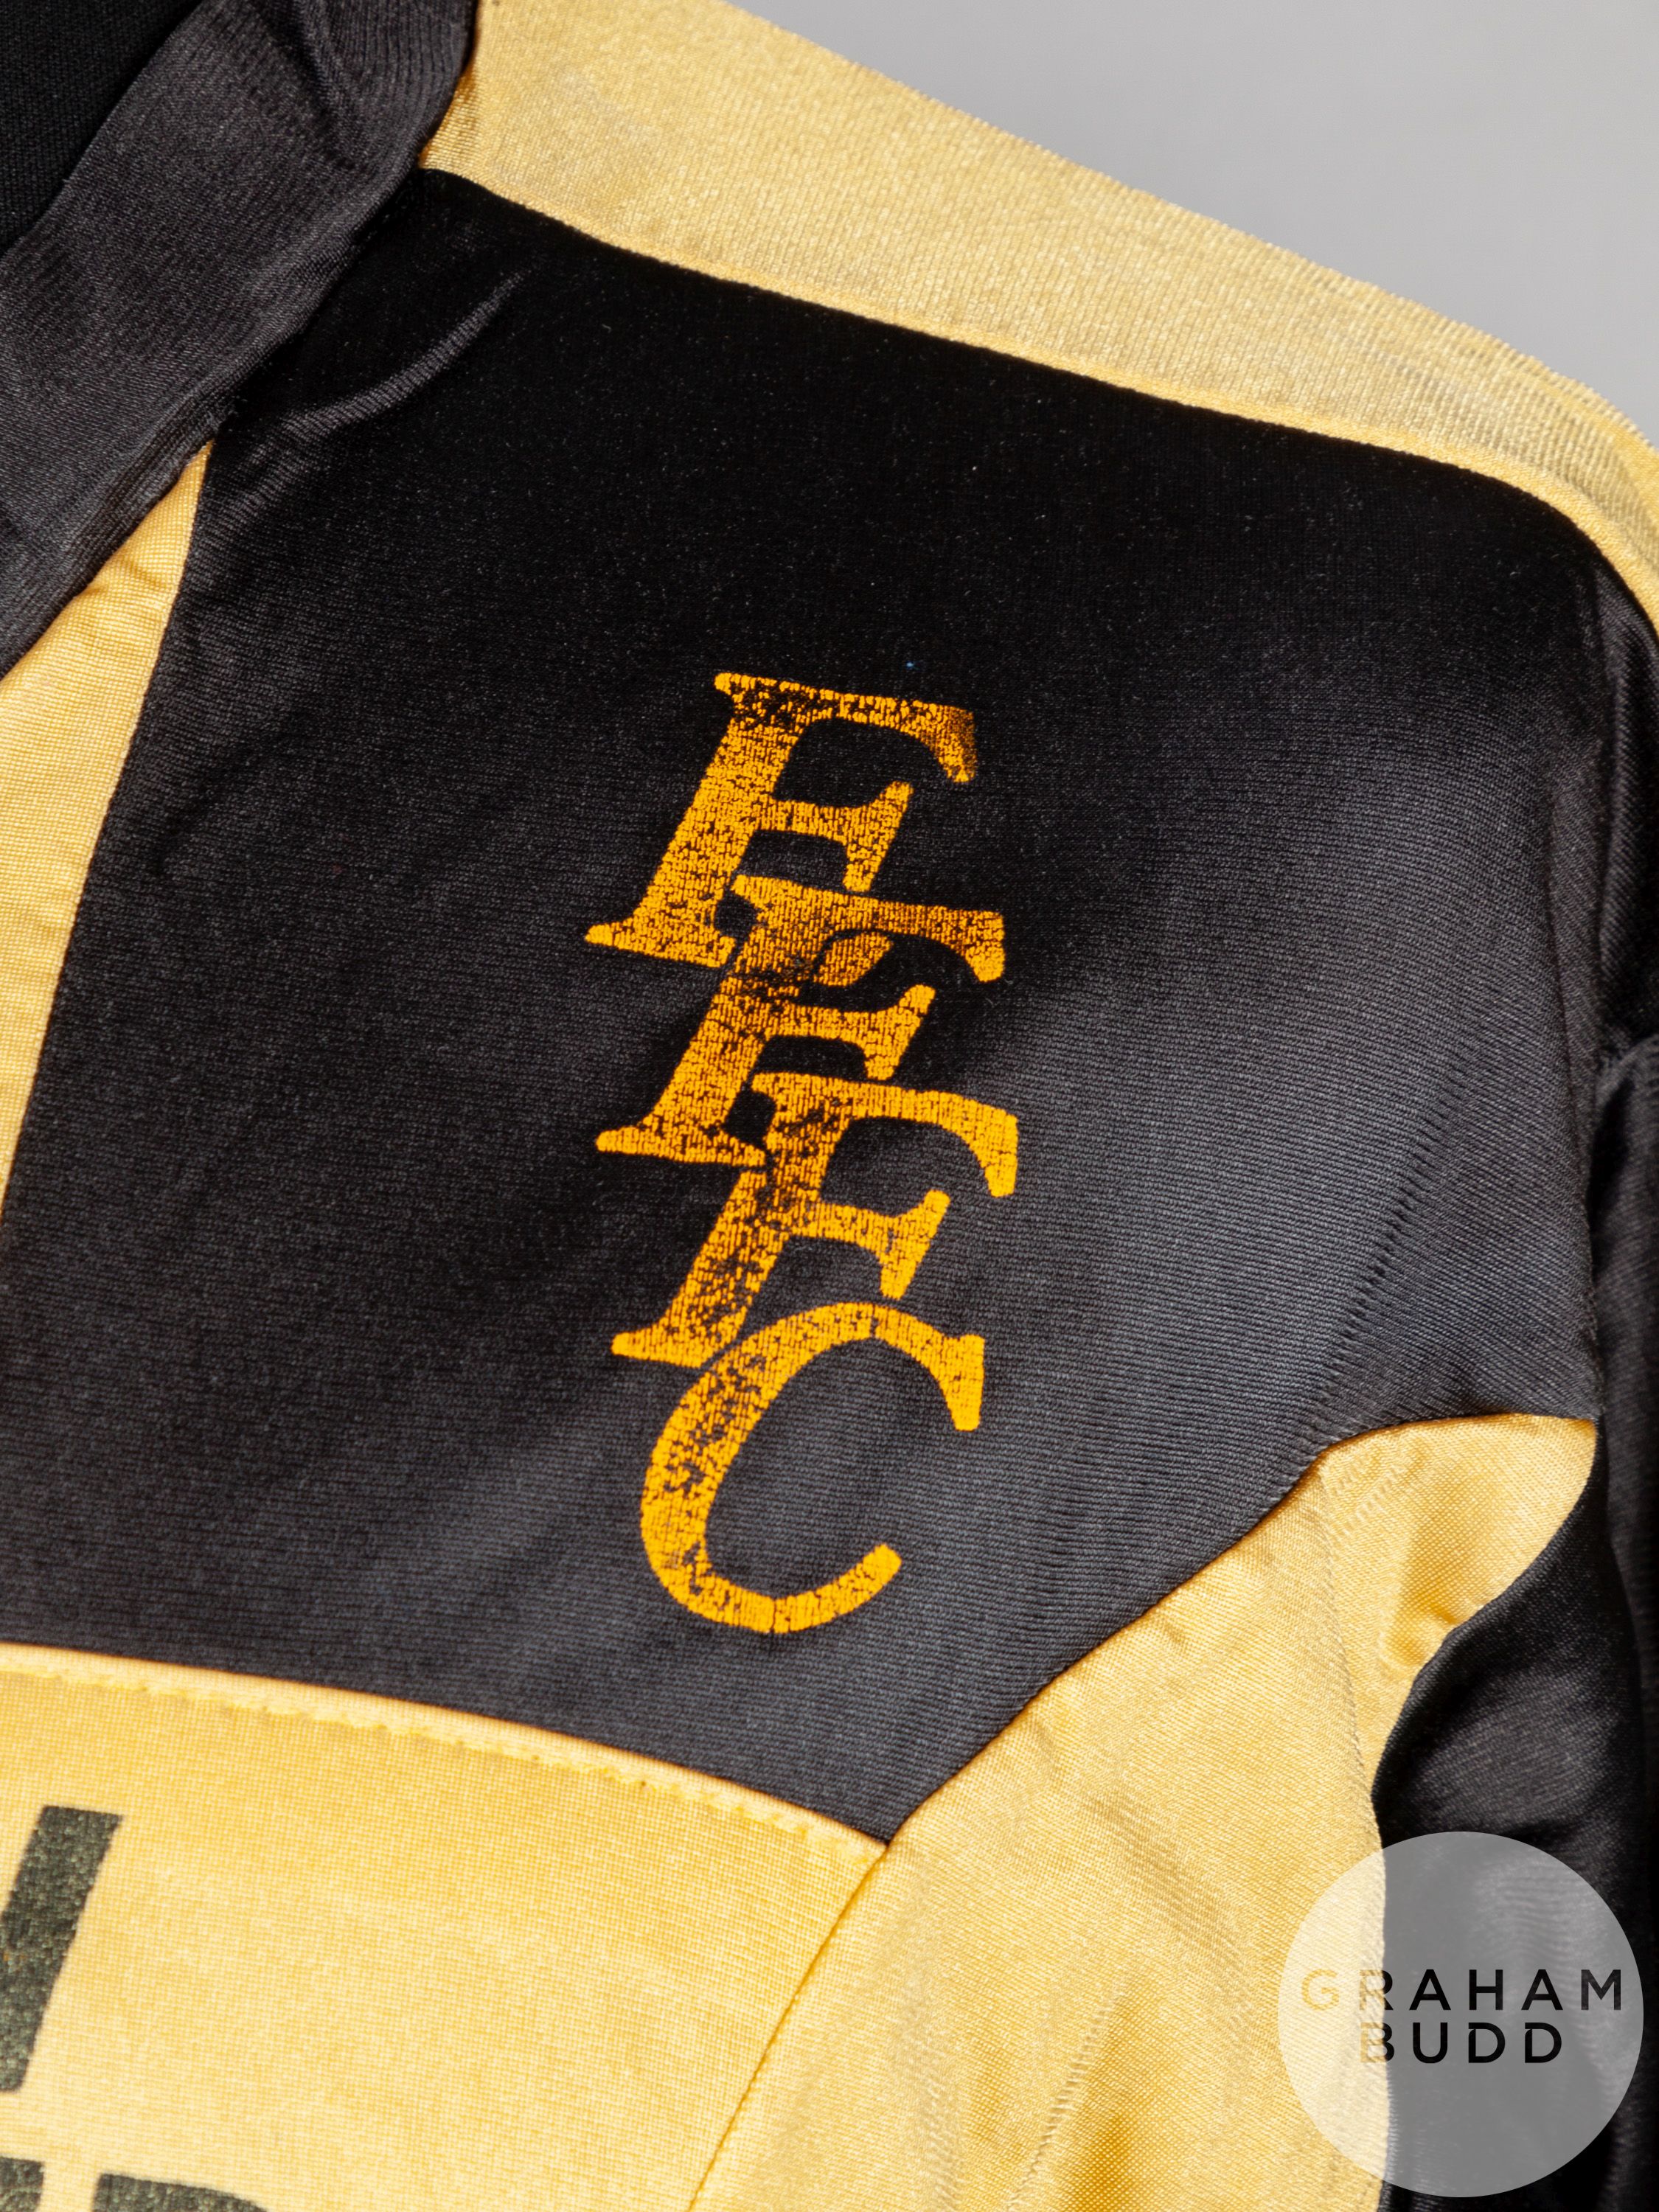 Yellow and black No.11 East Fife short-sleeved shirt, 1990-91 - Image 3 of 5